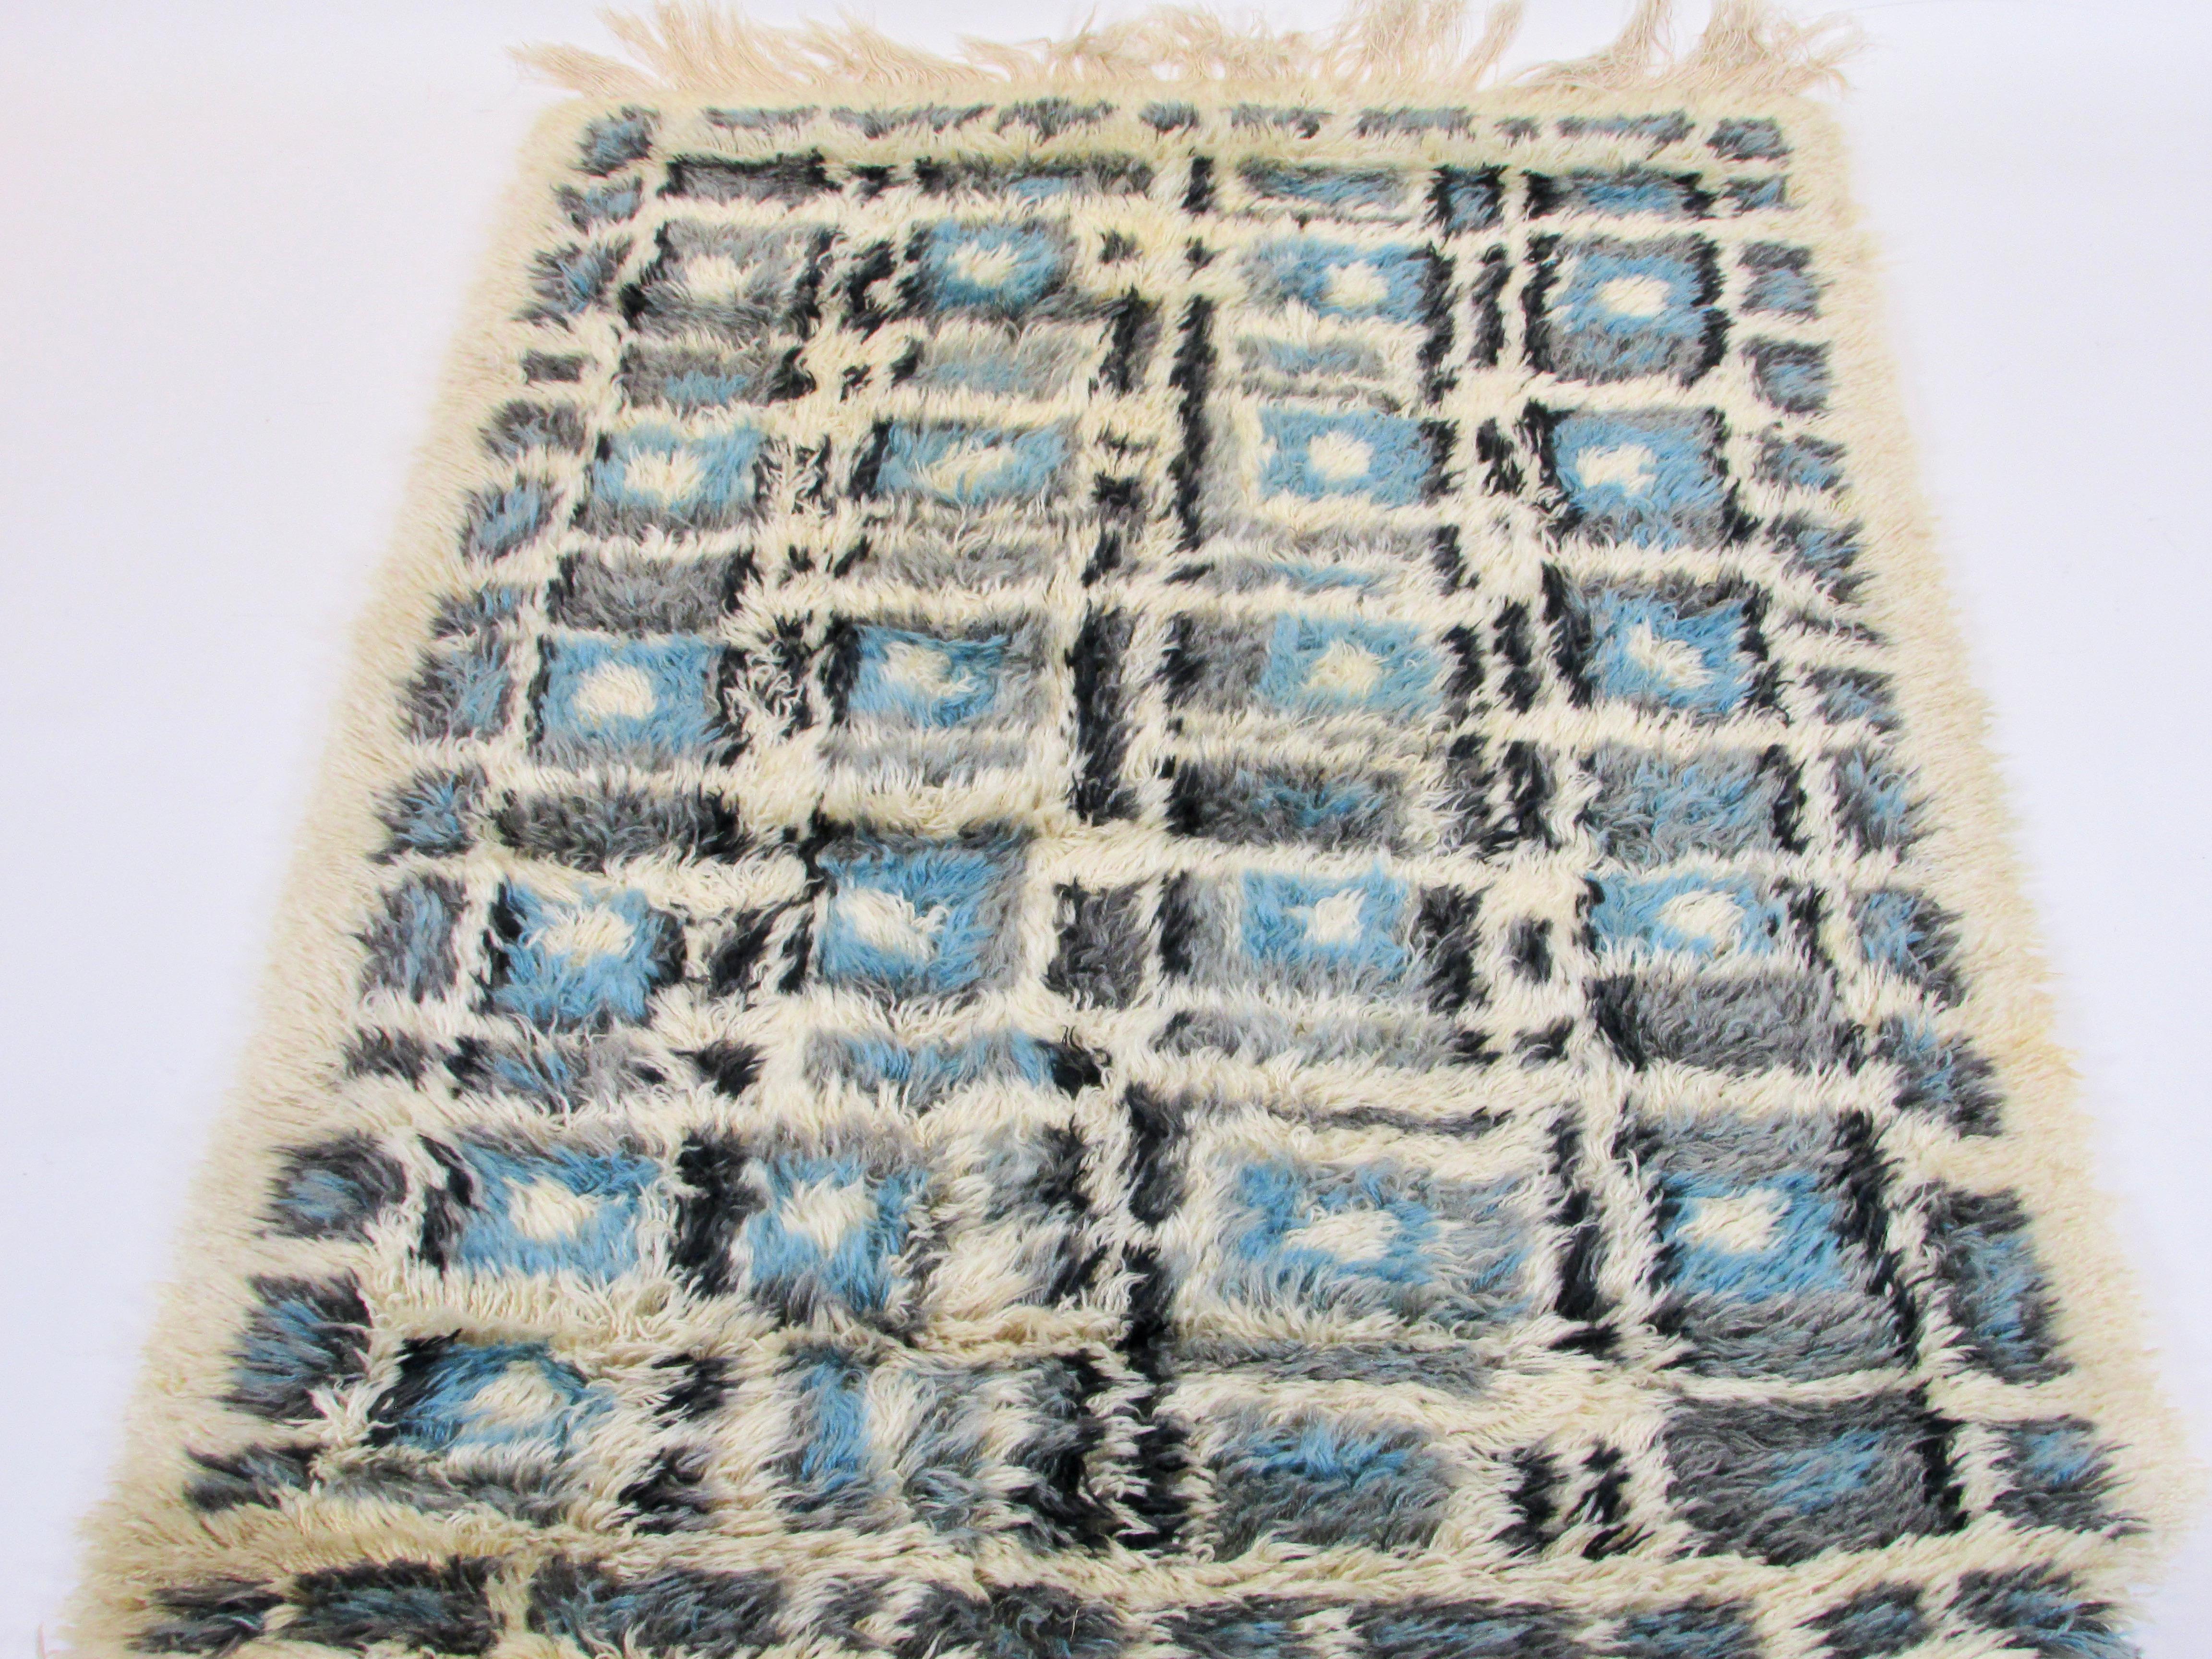 Hand woven Rya accent rug or wall hanging 